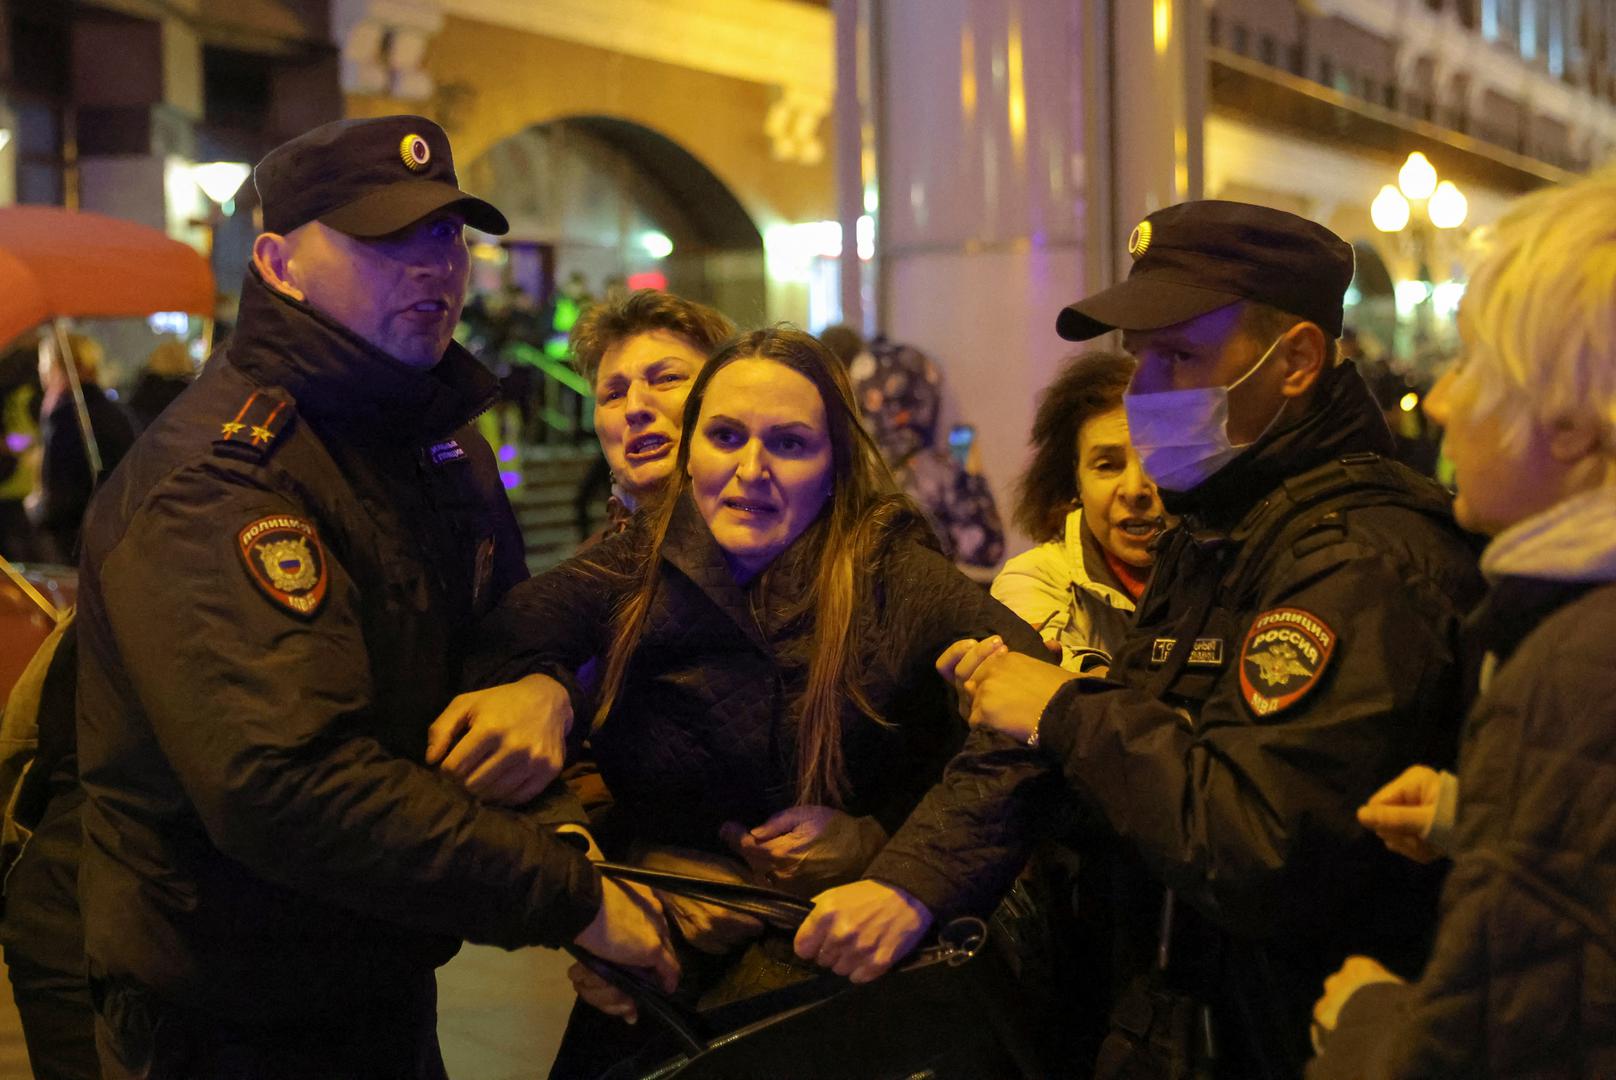 Russian police officers detain a person during an unsanctioned rally, after opposition activists called for street protests against the mobilisation of reservists ordered by President Vladimir Putin, in Moscow, Russia September 21, 2022. REUTERS/REUTERS PHOTOGRAPHER Photo: Reuters Photographer/REUTERS